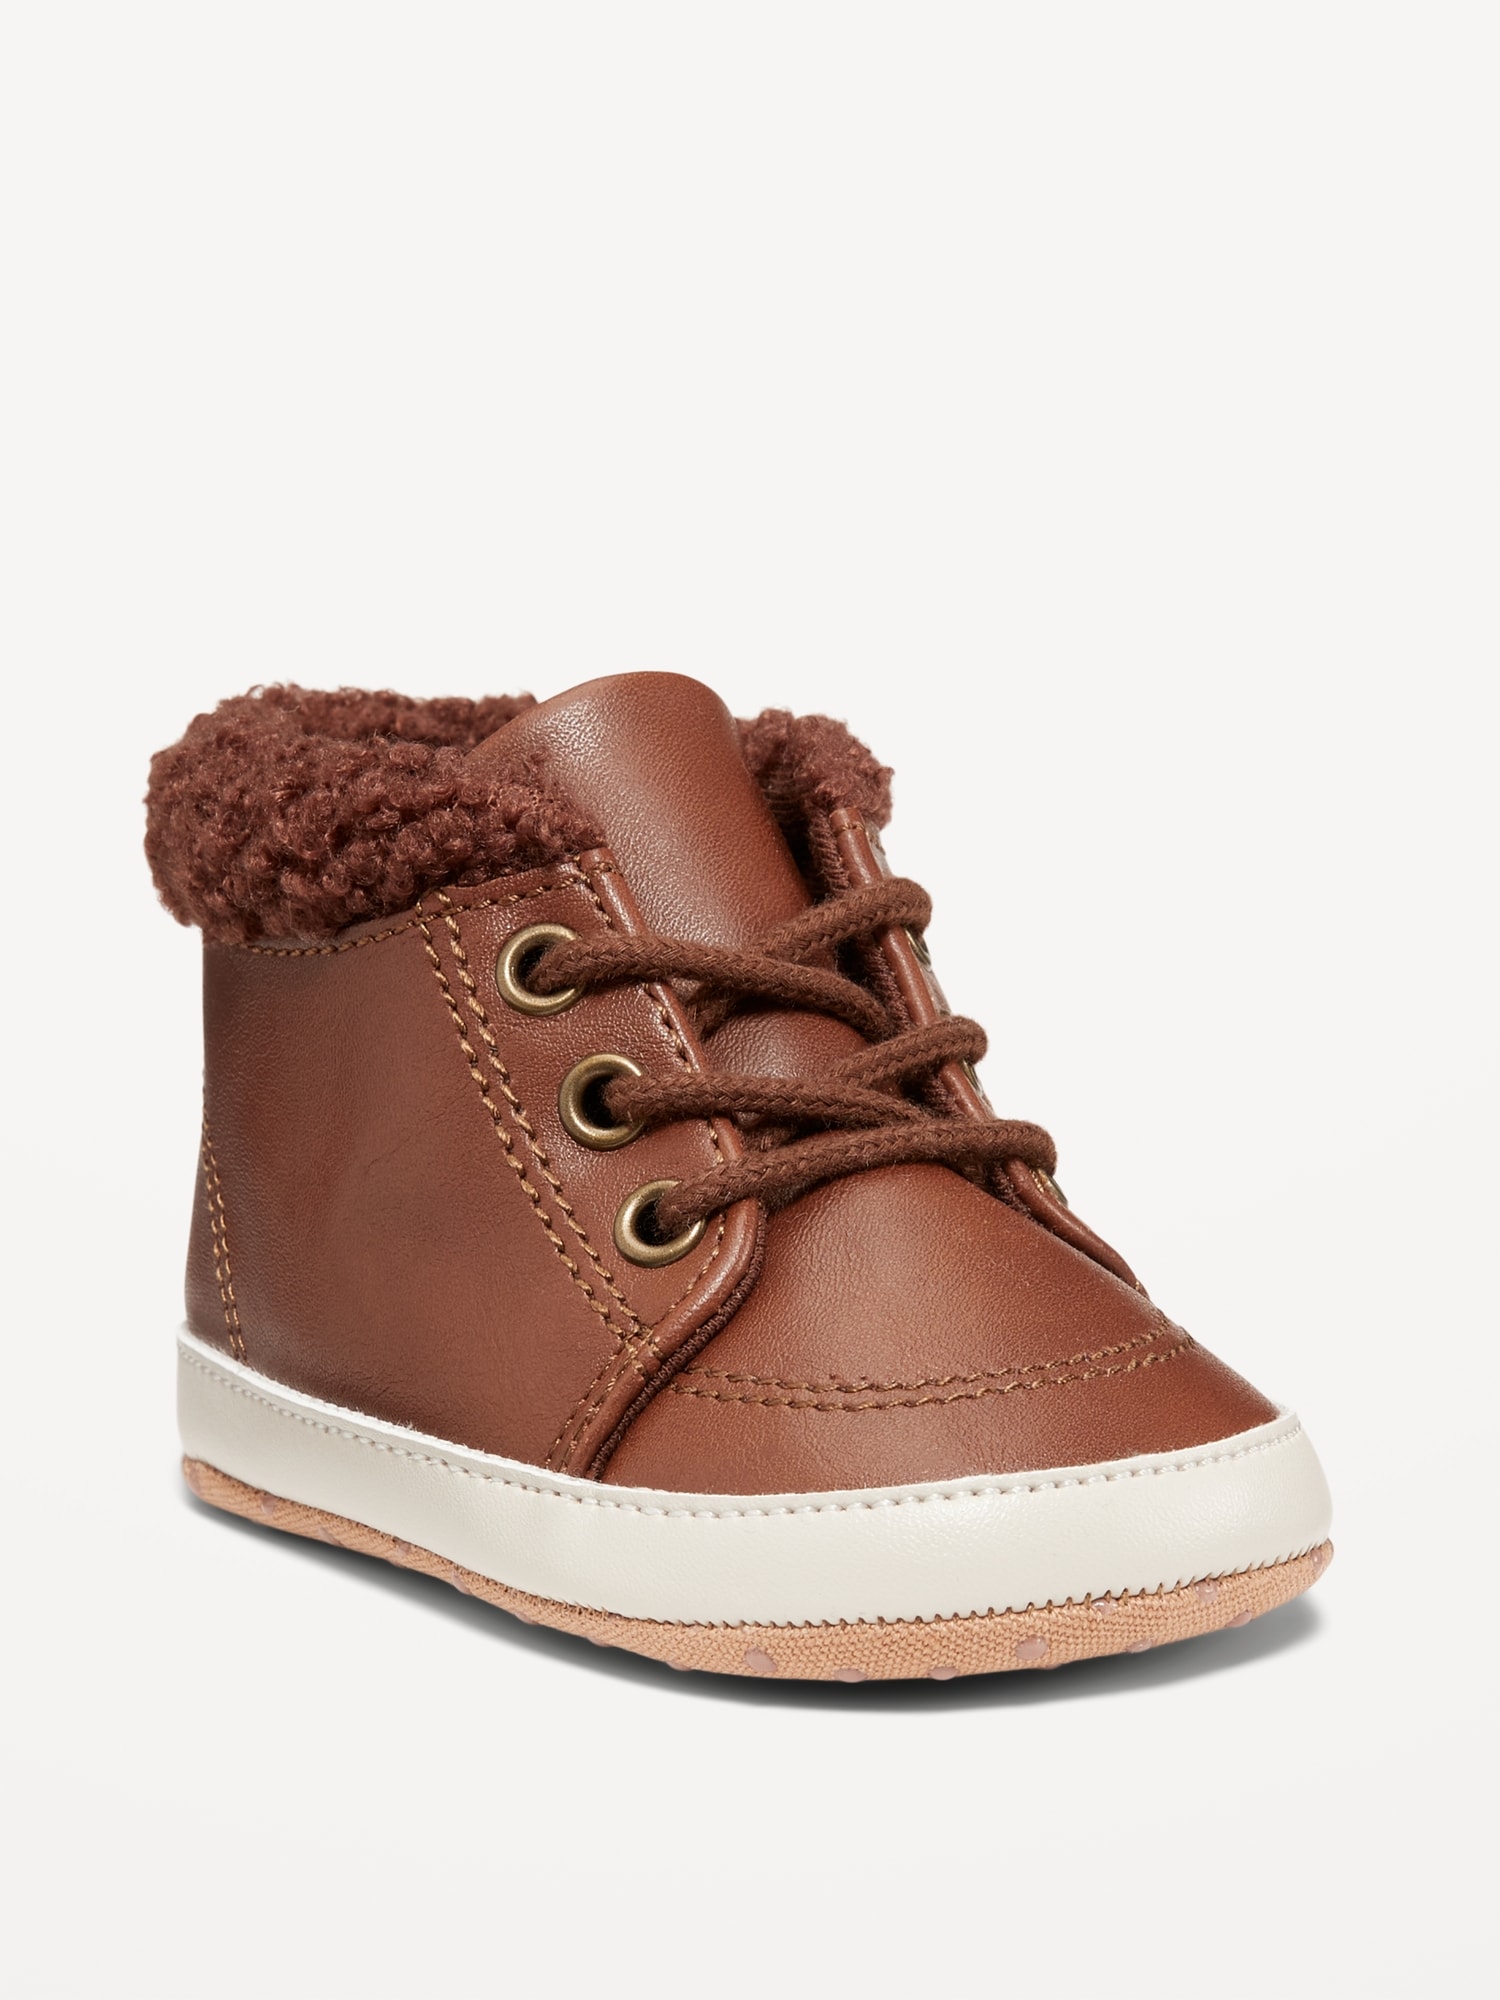 Oldnavy Faux-Leather Sherpa Booties for Baby